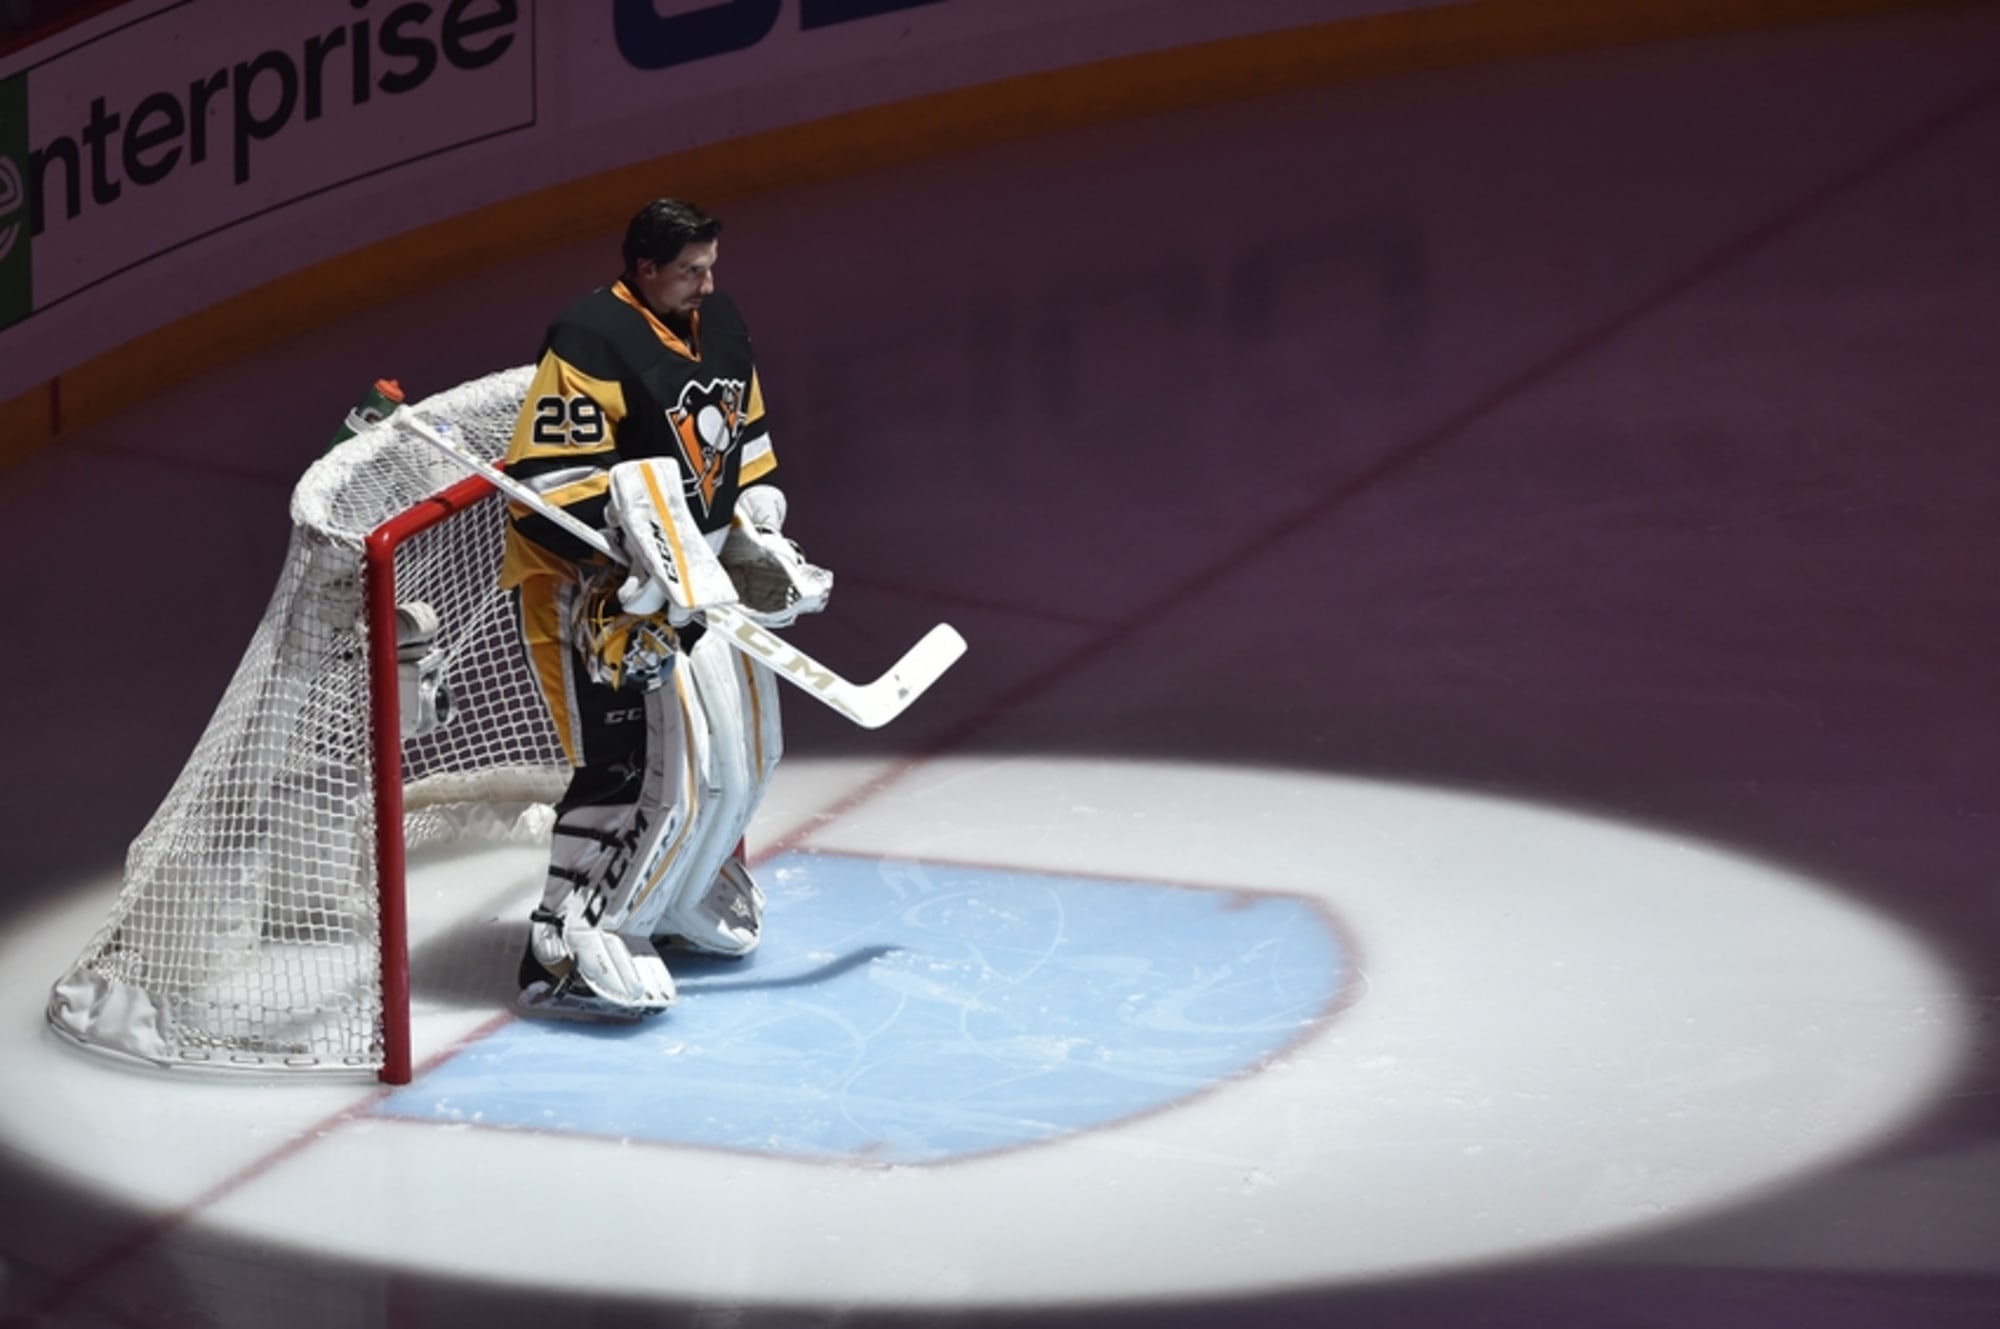 Penguins have tough time after Fleury makes first appearance in